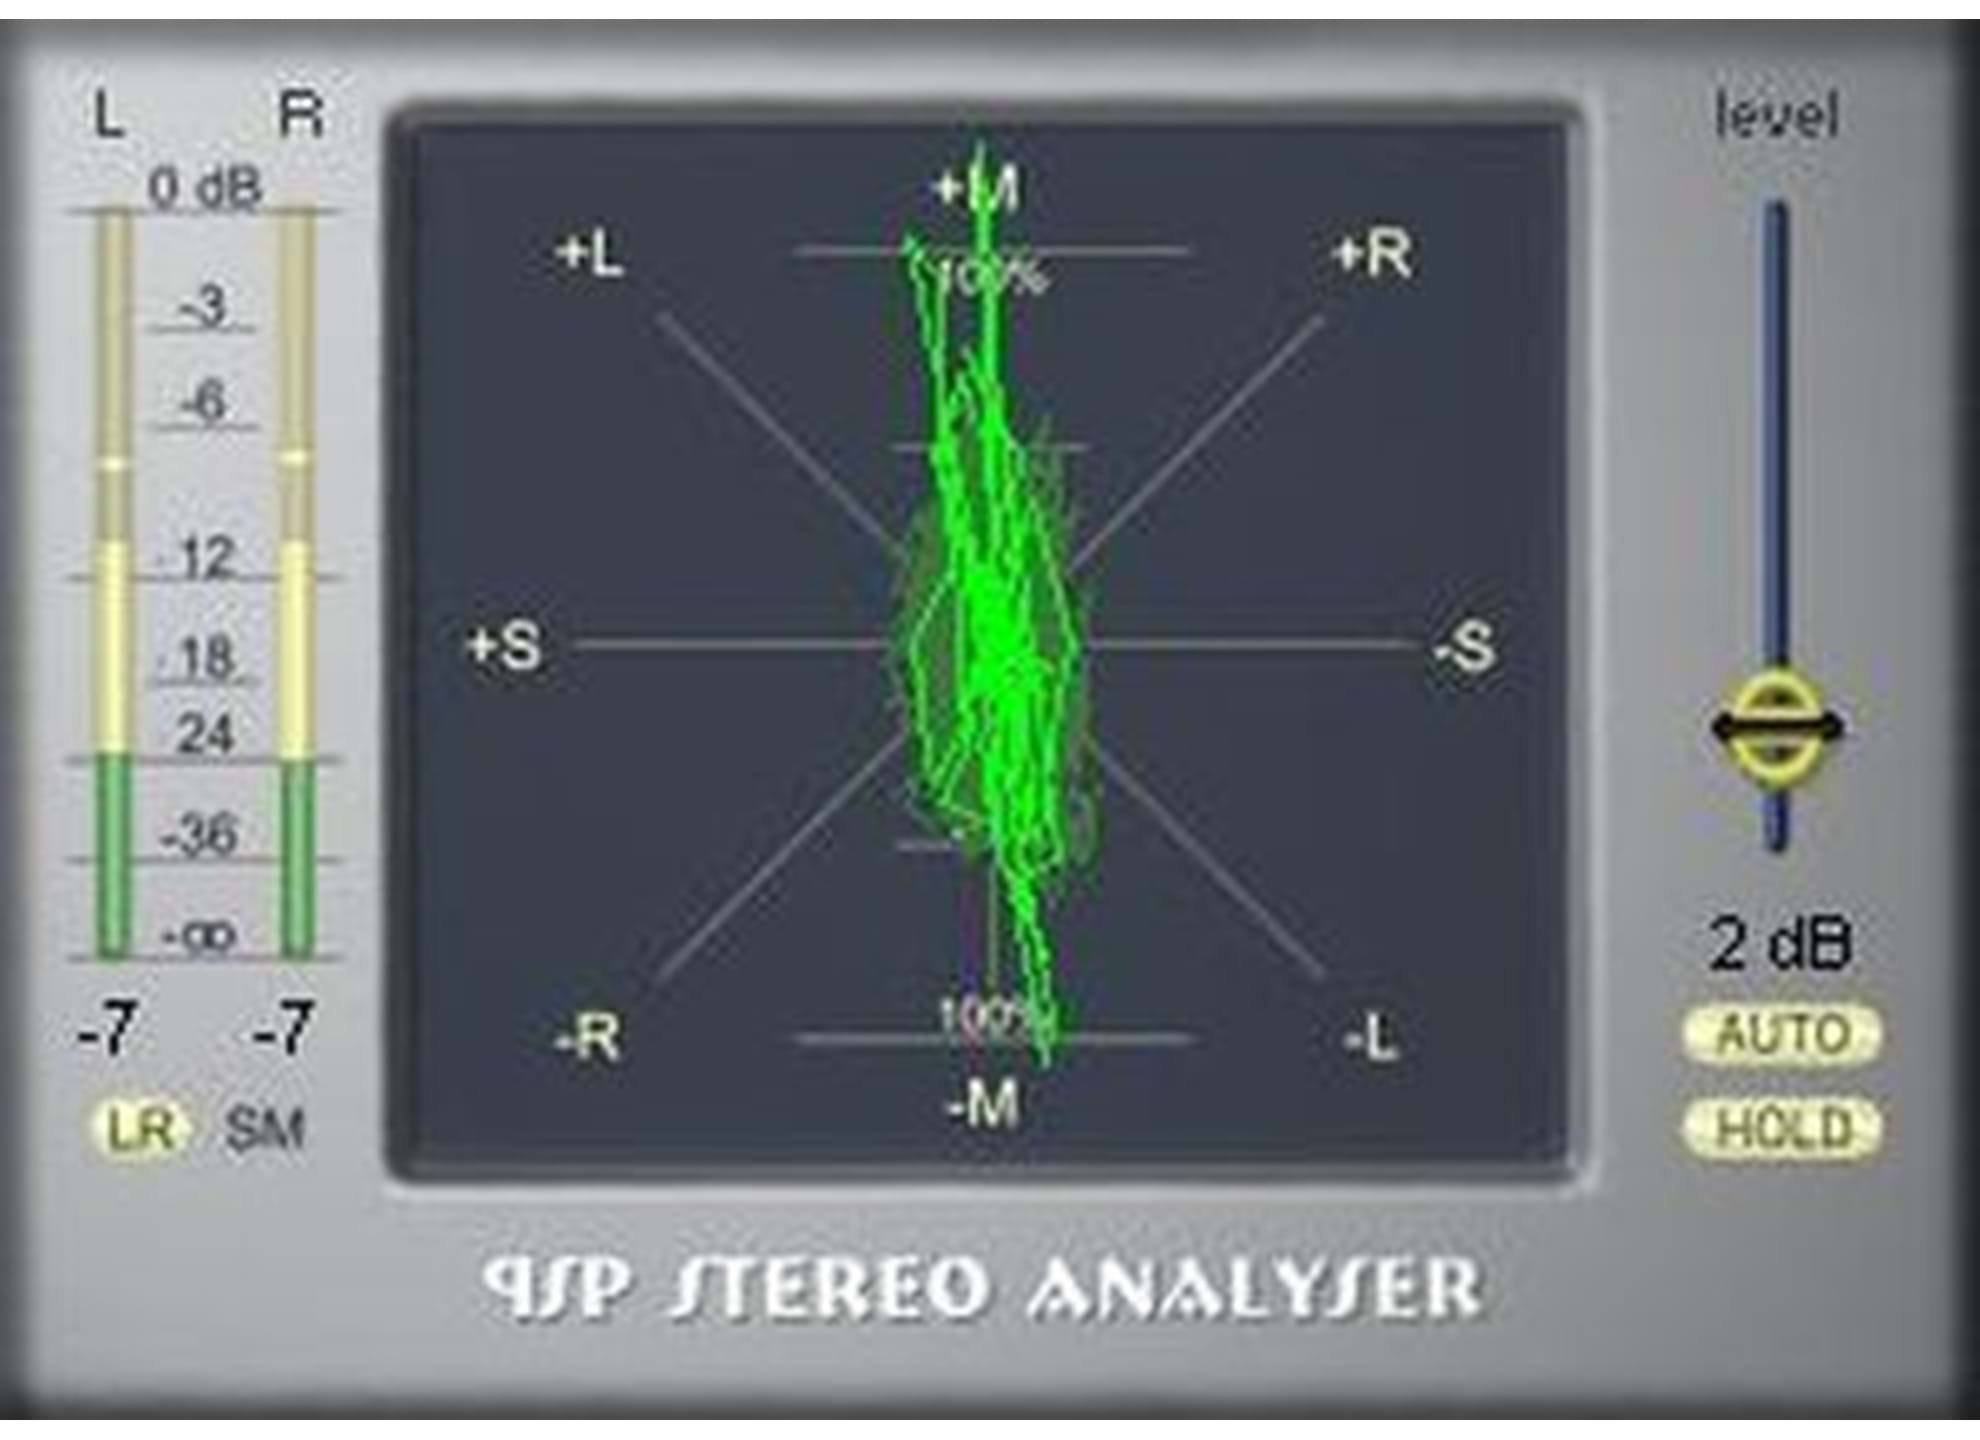 StereoPack